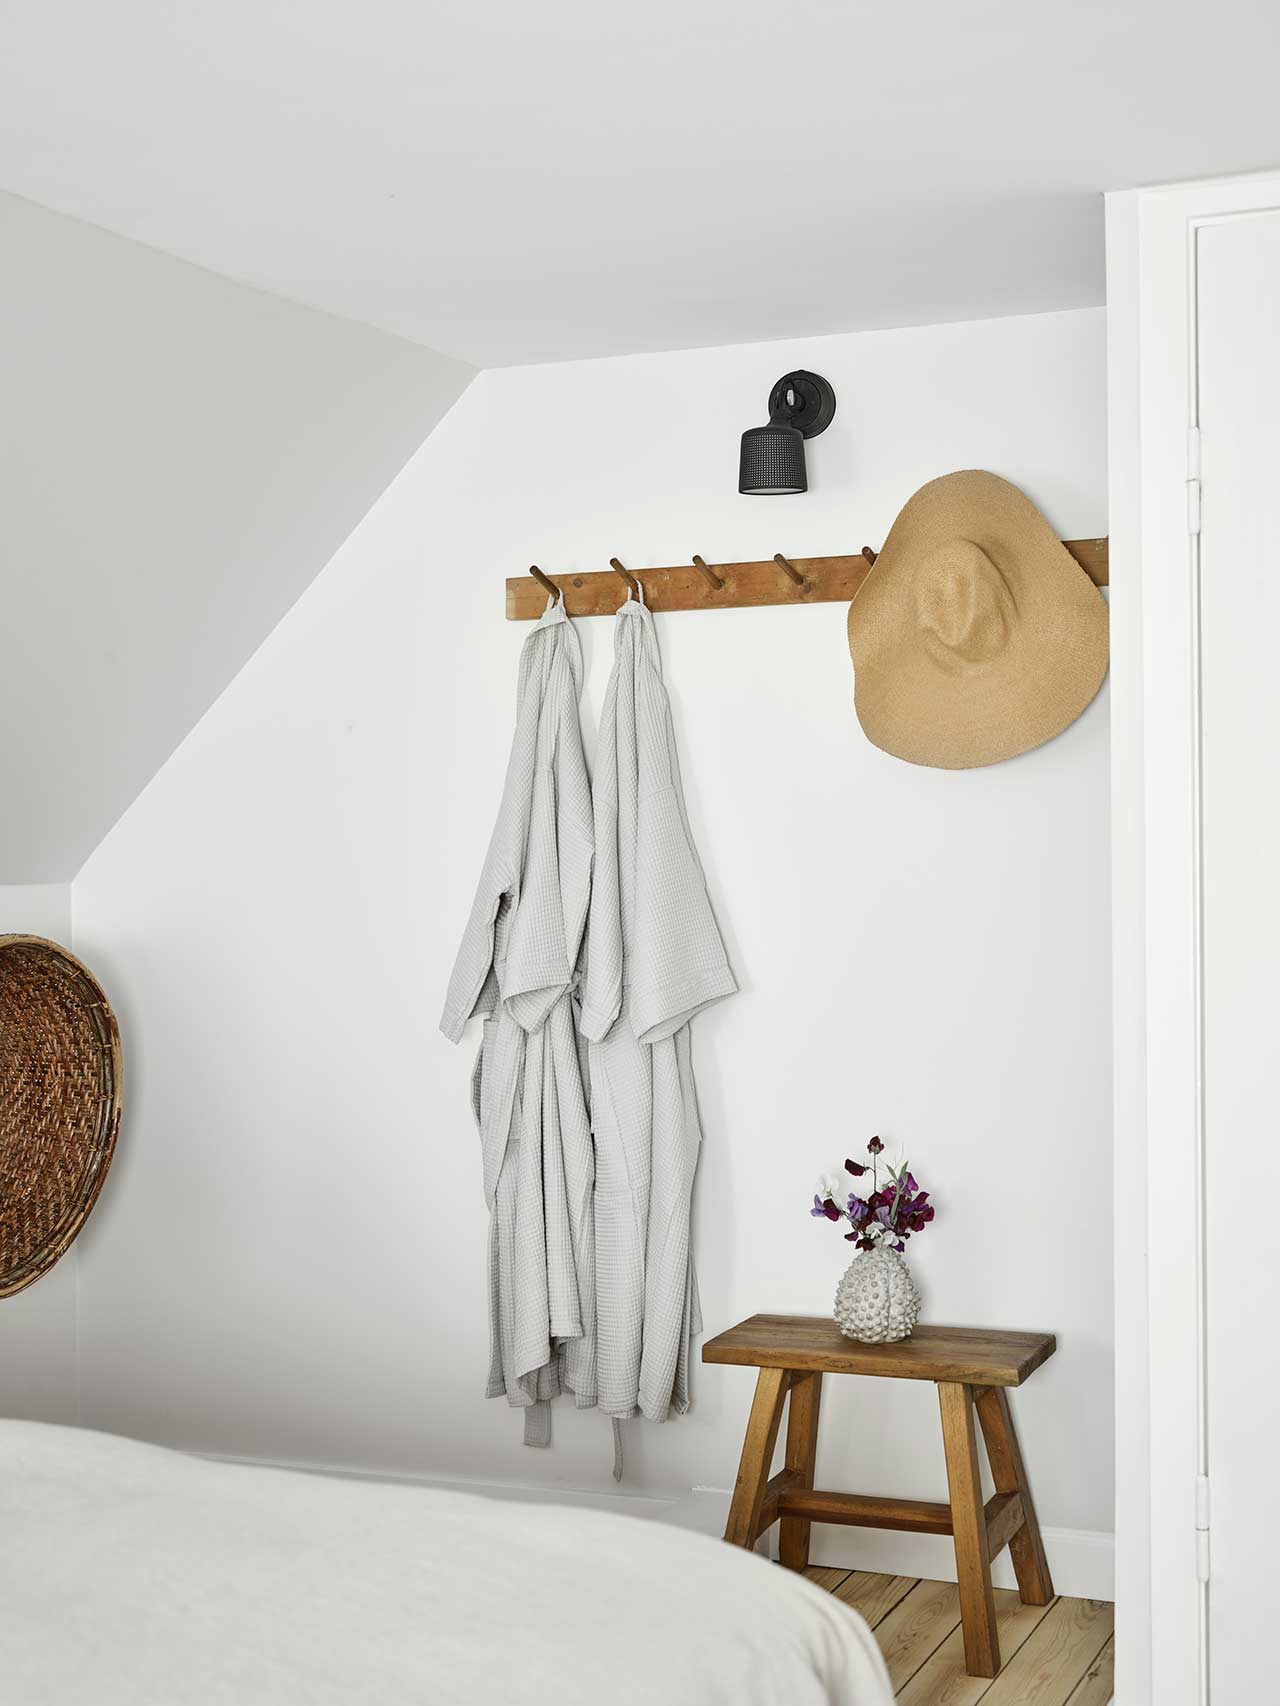 wall rack holding bathrobes and hat